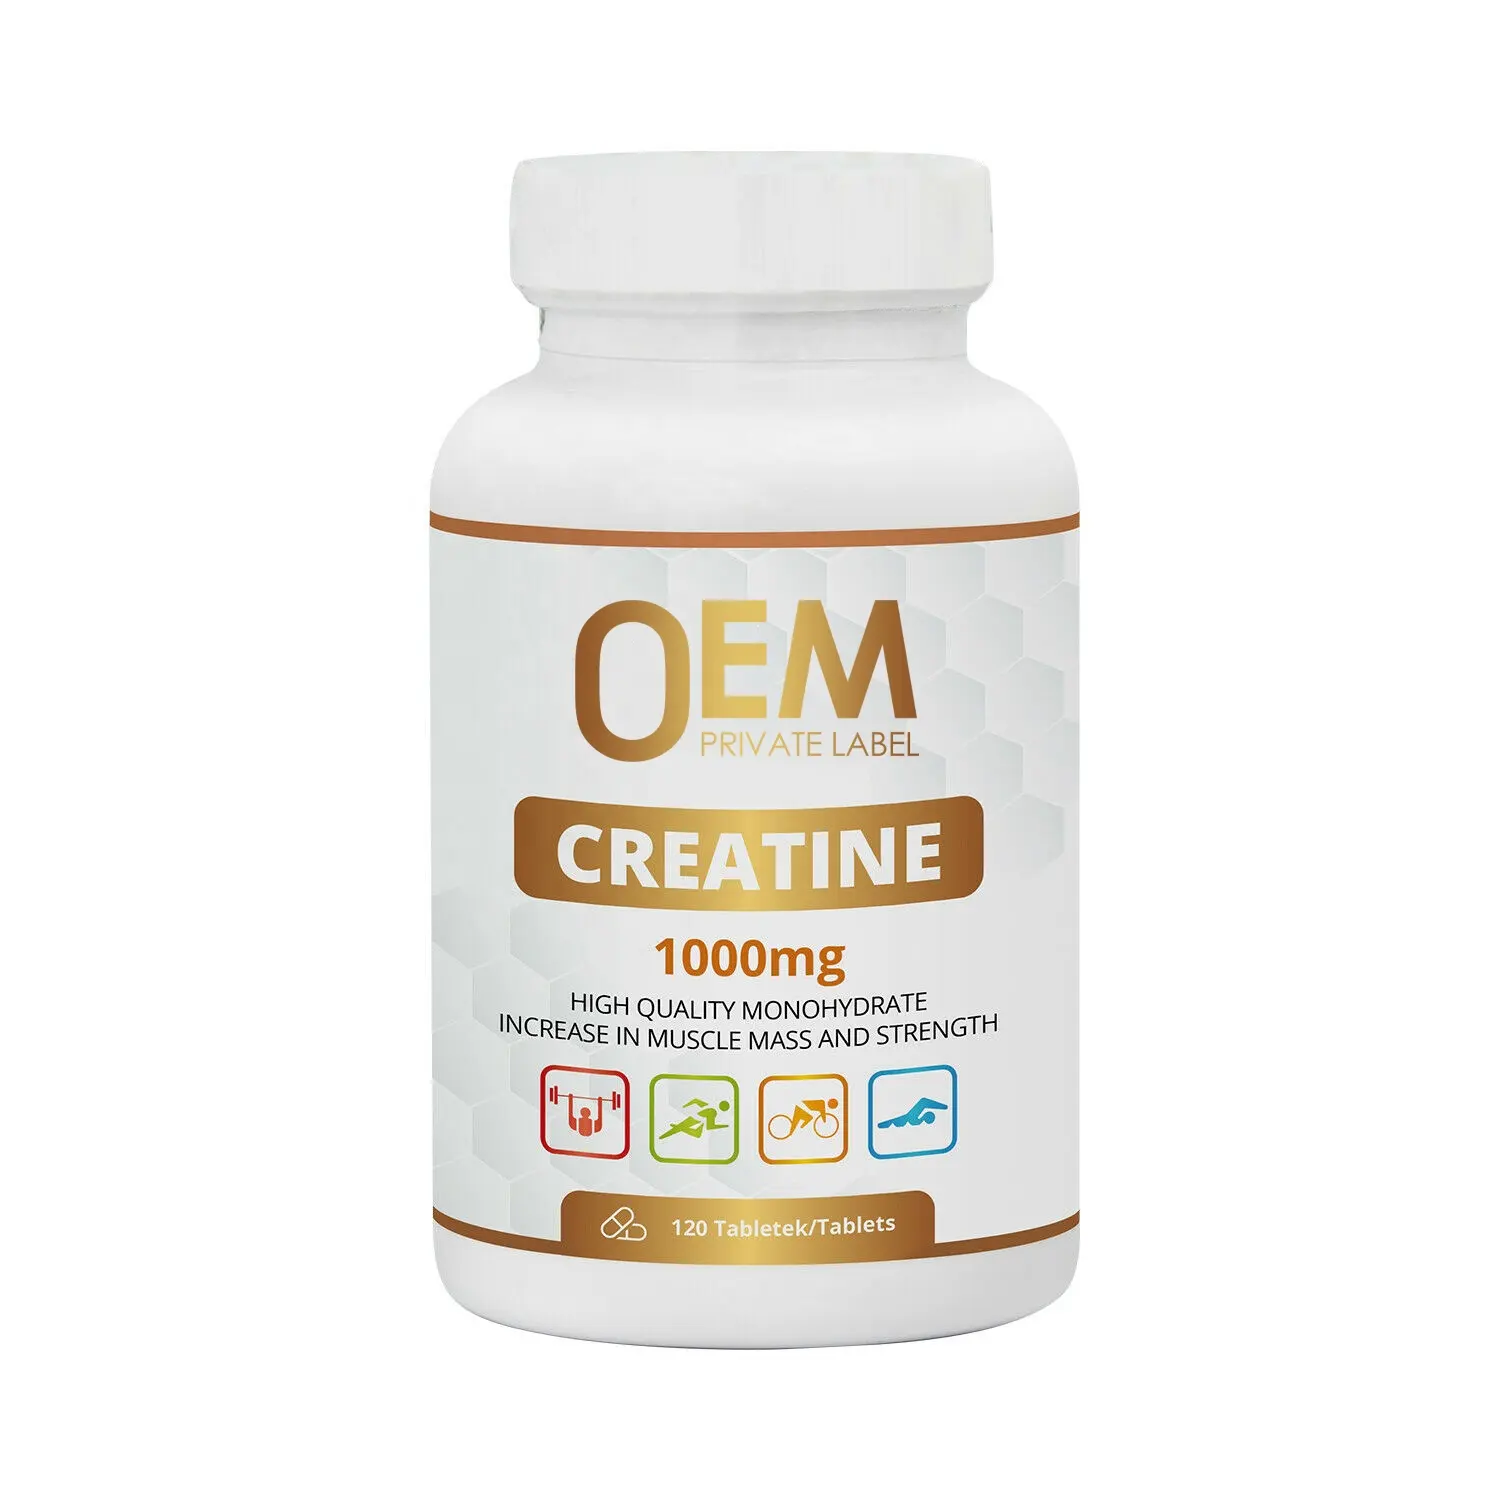 OEM Creatine Monohydrate Tablets Improves muscle hydration Increases muscle strength Accelerates regeneration Creatine Capsules